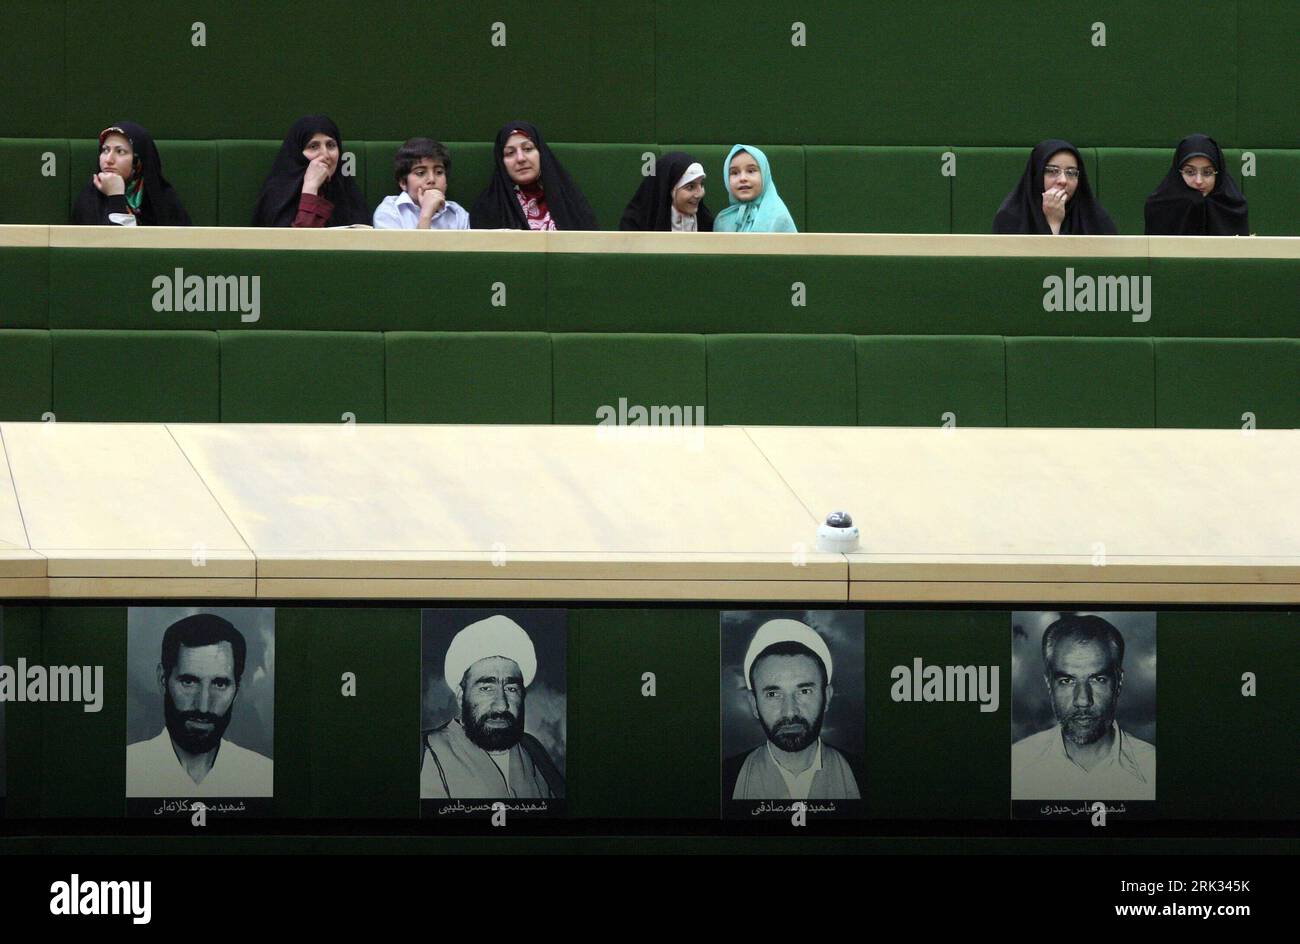 Bildnummer: 53314639  Datum: 02.09.2009  Copyright: imago/Xinhua (090902) -- TEHRAN, Sept. 2, 2009 (Xinhua) -- Some Iranian women sit in on the parliament meeting in Tehran, capital of Iran, Sept. 2, 2009. Iran s parliament continued to study the qualifications of the new 21-member cabinet line-up on Wednesday. Voting for the proposed ministers scheduled on Wednesday has been prolonged to Thursday. (Xinhua/Ahmad Halabisaz) (gxr) (4)IRAN-TEHRAN-PARLIAMENT-CABINET-VOTE PUBLICATIONxNOTxINxCHN  Politik premiumd kbdig xsp 2009 quer    Bildnummer 53314639 Date 02 09 2009 Copyright Imago XINHUA  TEHR Stock Photo